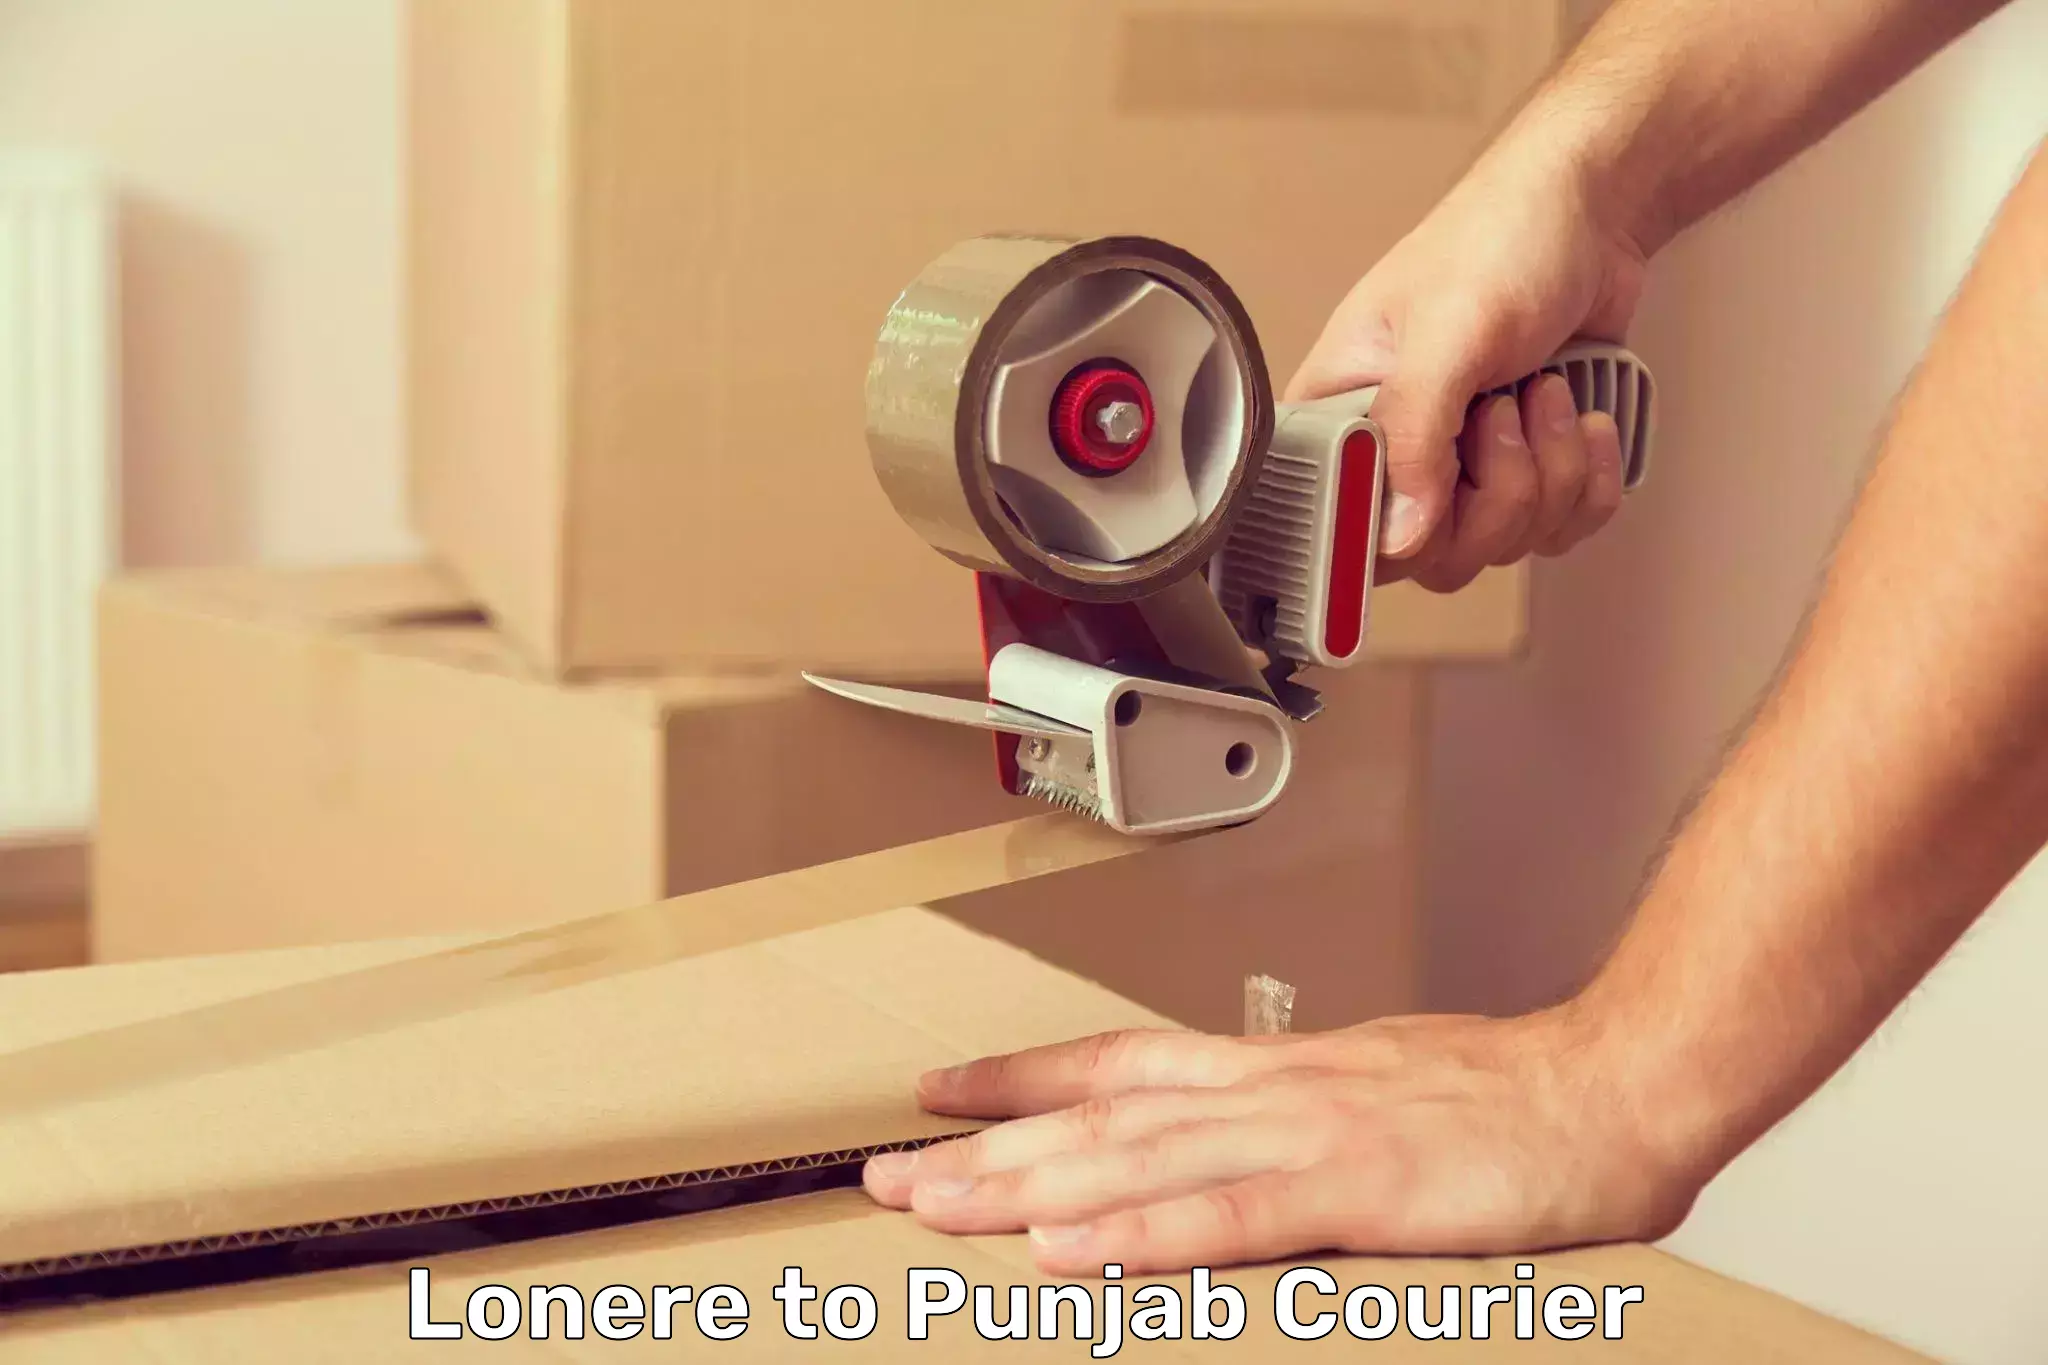 Expedited parcel delivery Lonere to Ludhiana